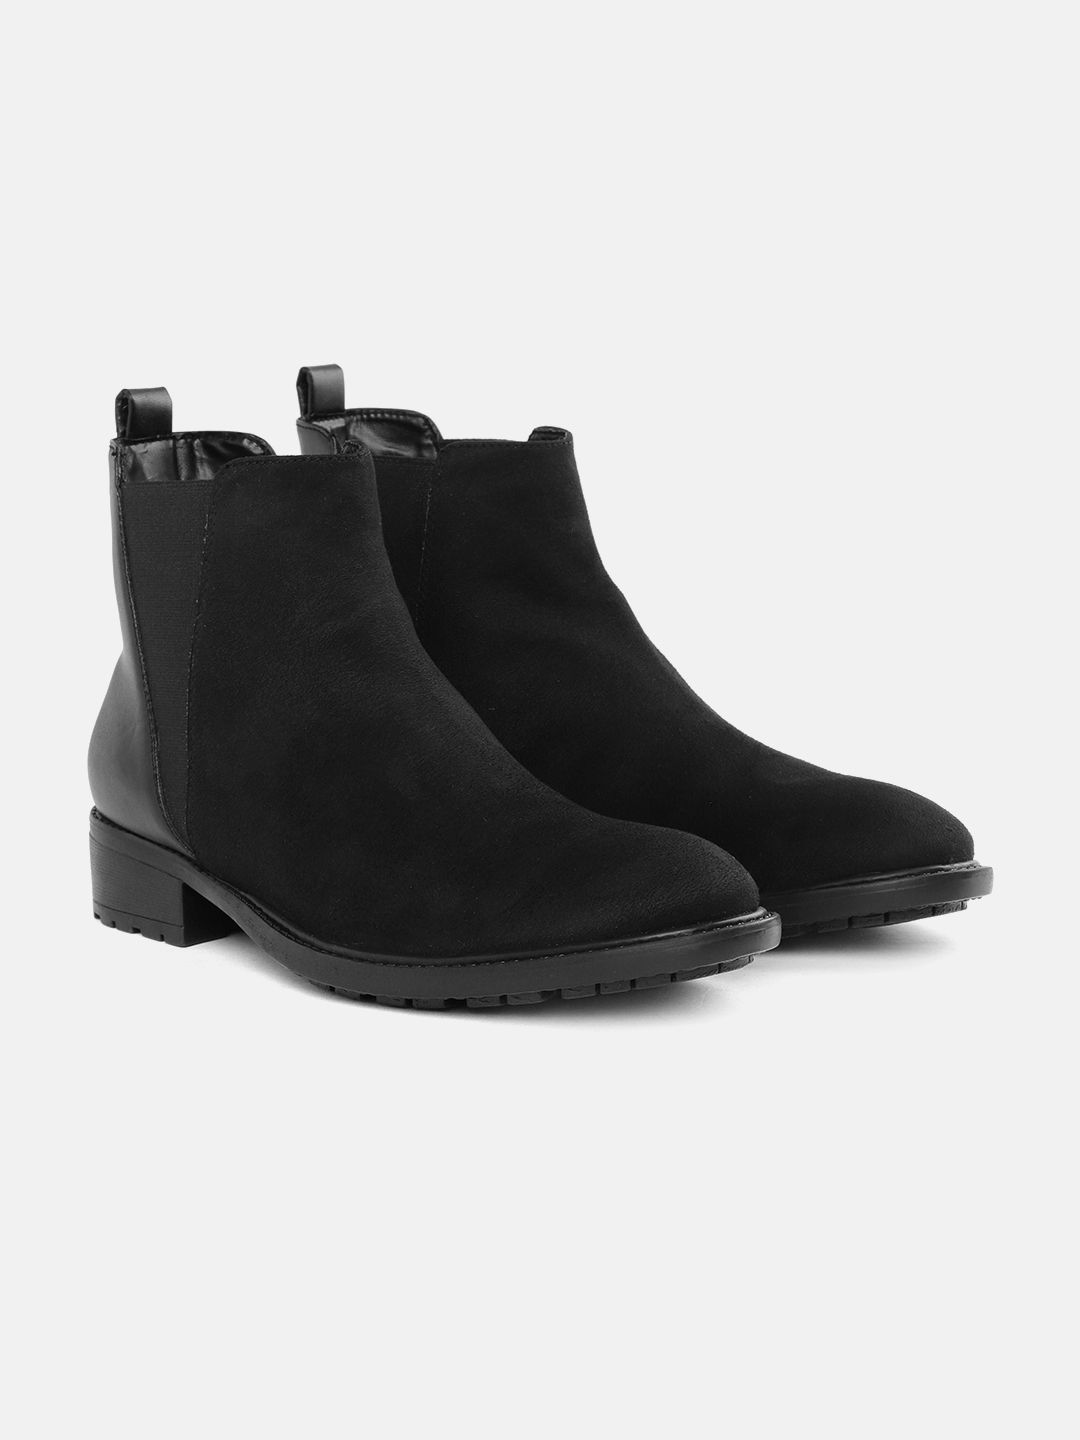 DressBerry Women Black Solid Mid-Top Chelsea Boots Price in India